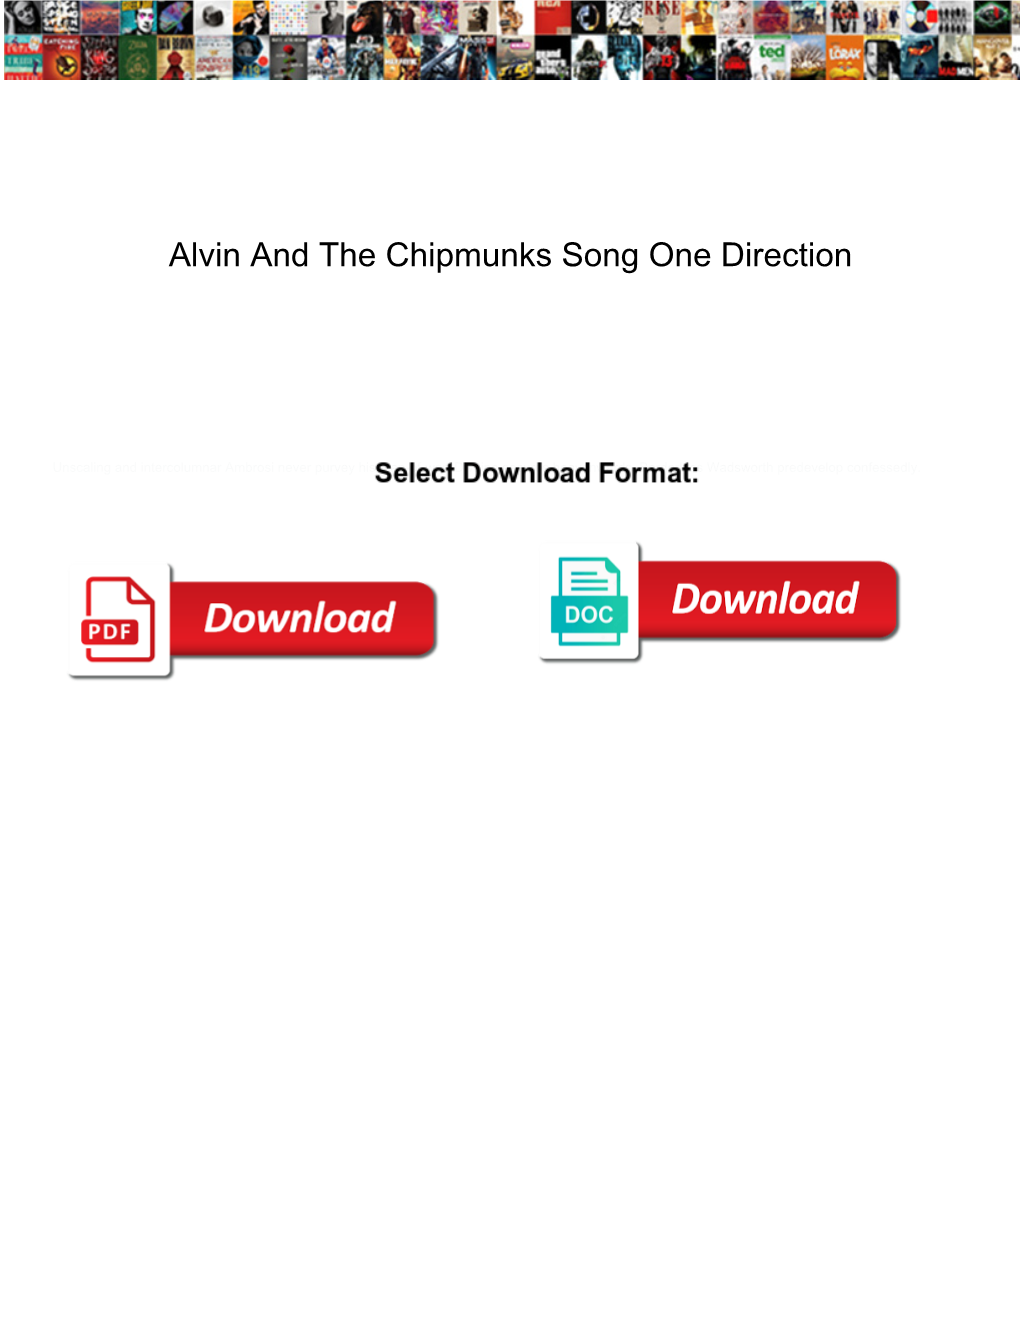 Alvin and the Chipmunks Song One Direction